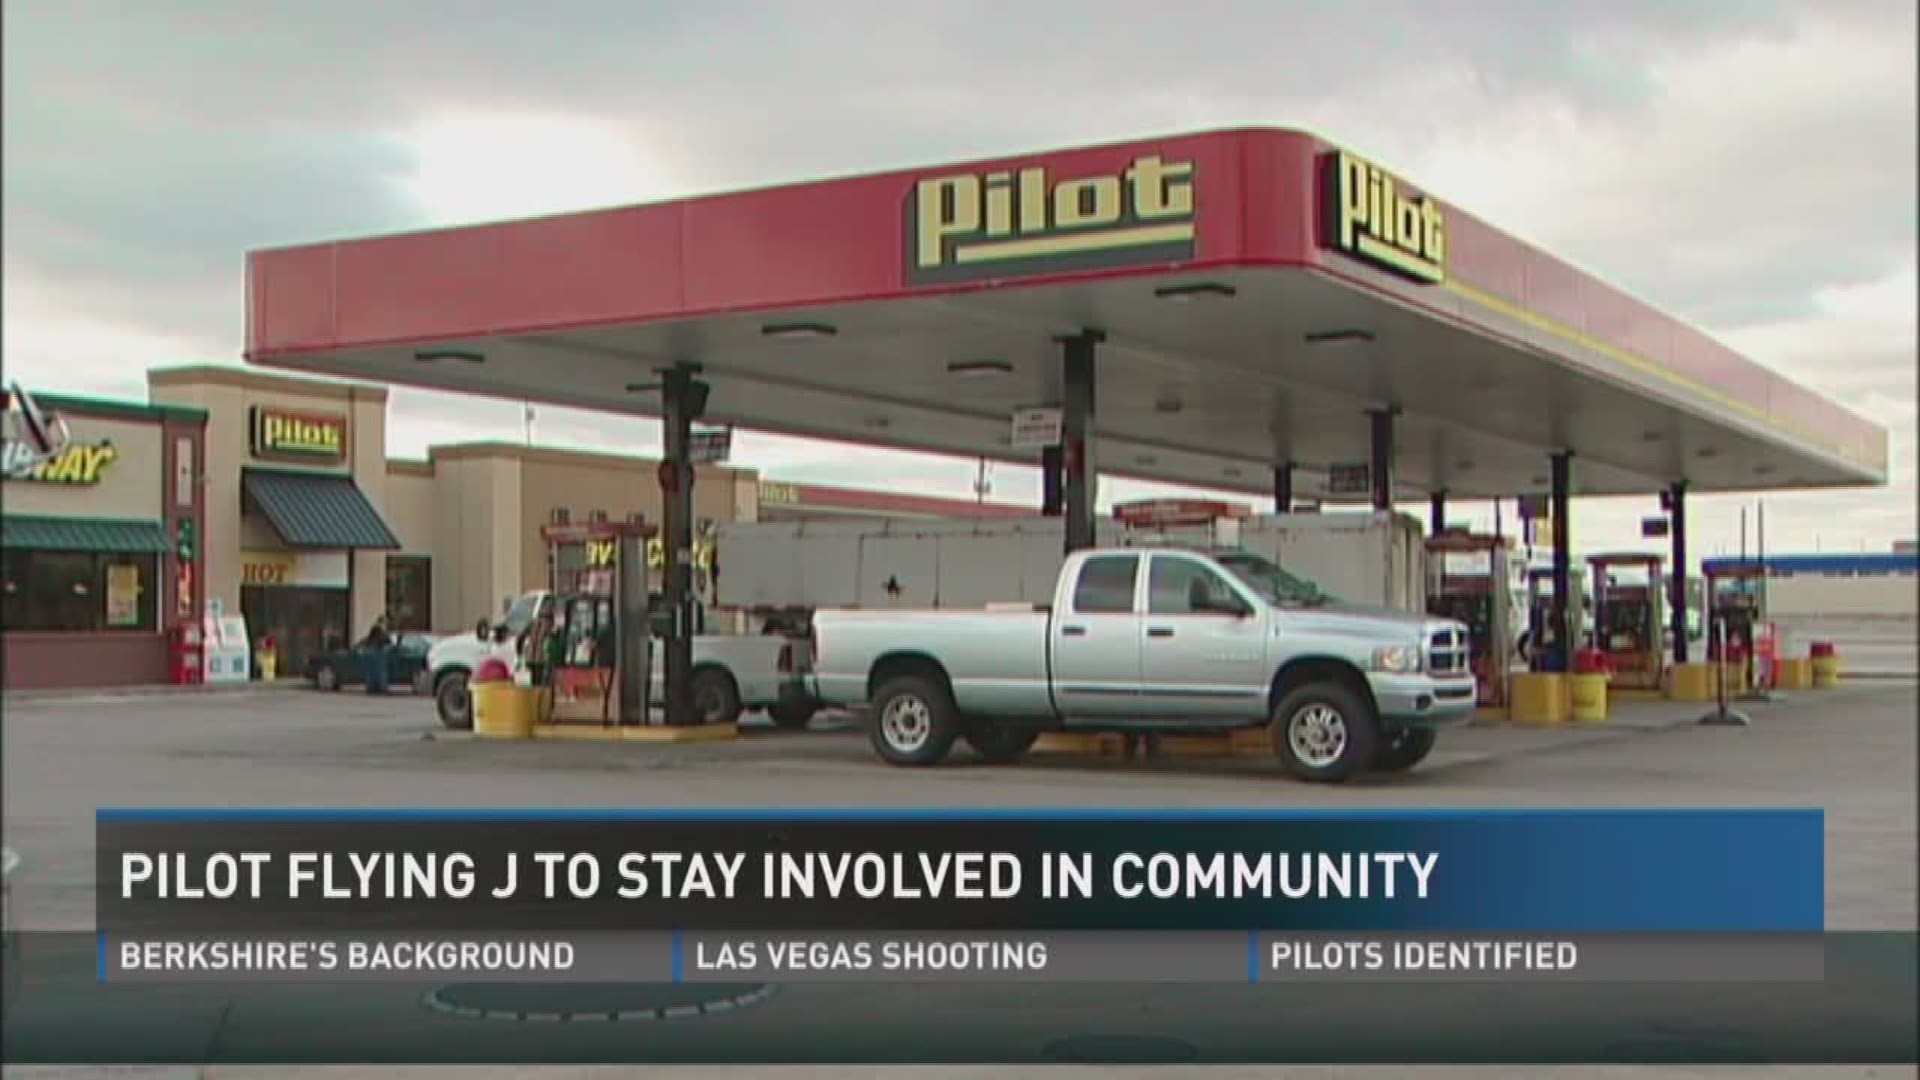 Oct. 3, 2017: With Berkshire Hathaway set to take a majority ownership in Pilot Flying J, Pilot CEO Jimmy Haslam says that won't change the company's community involvement.